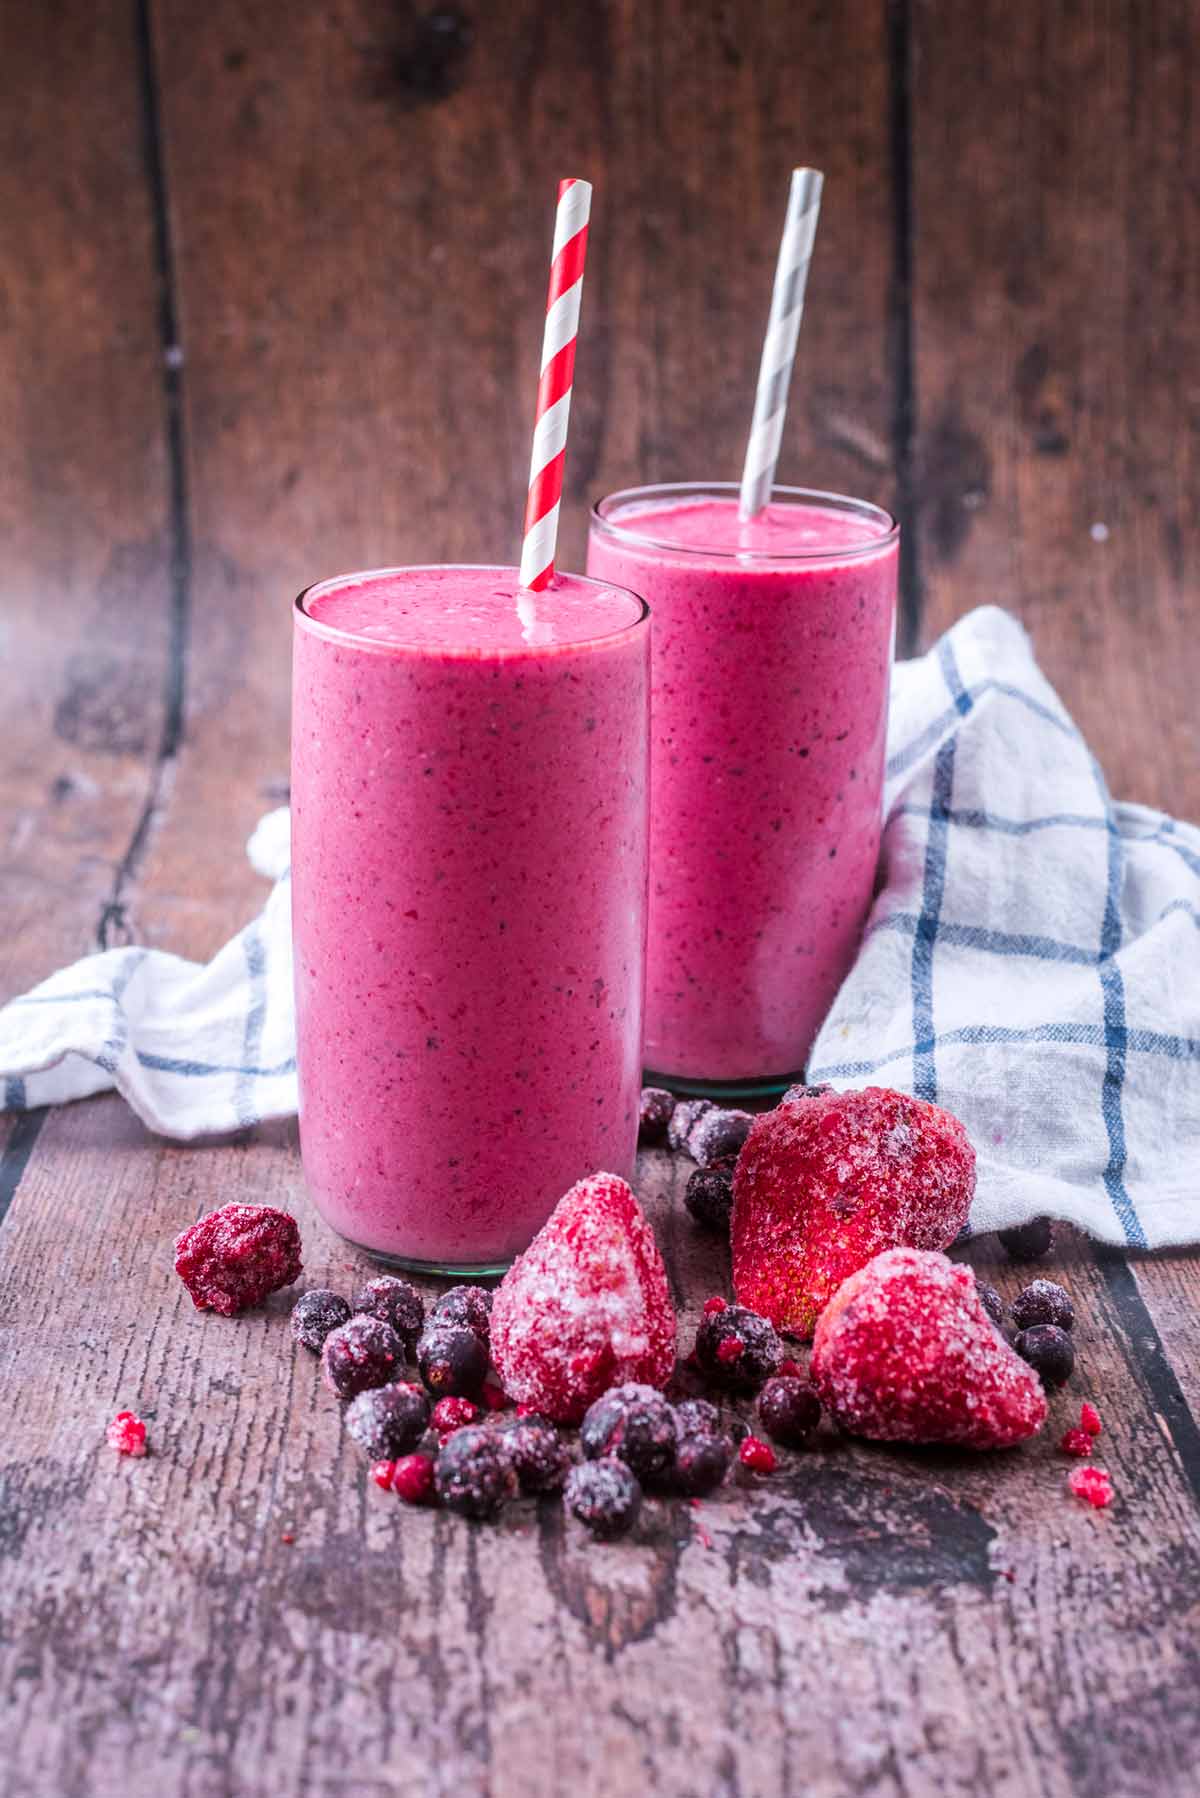 Two glasses of pink coloured smoothie with striped drinking straws.